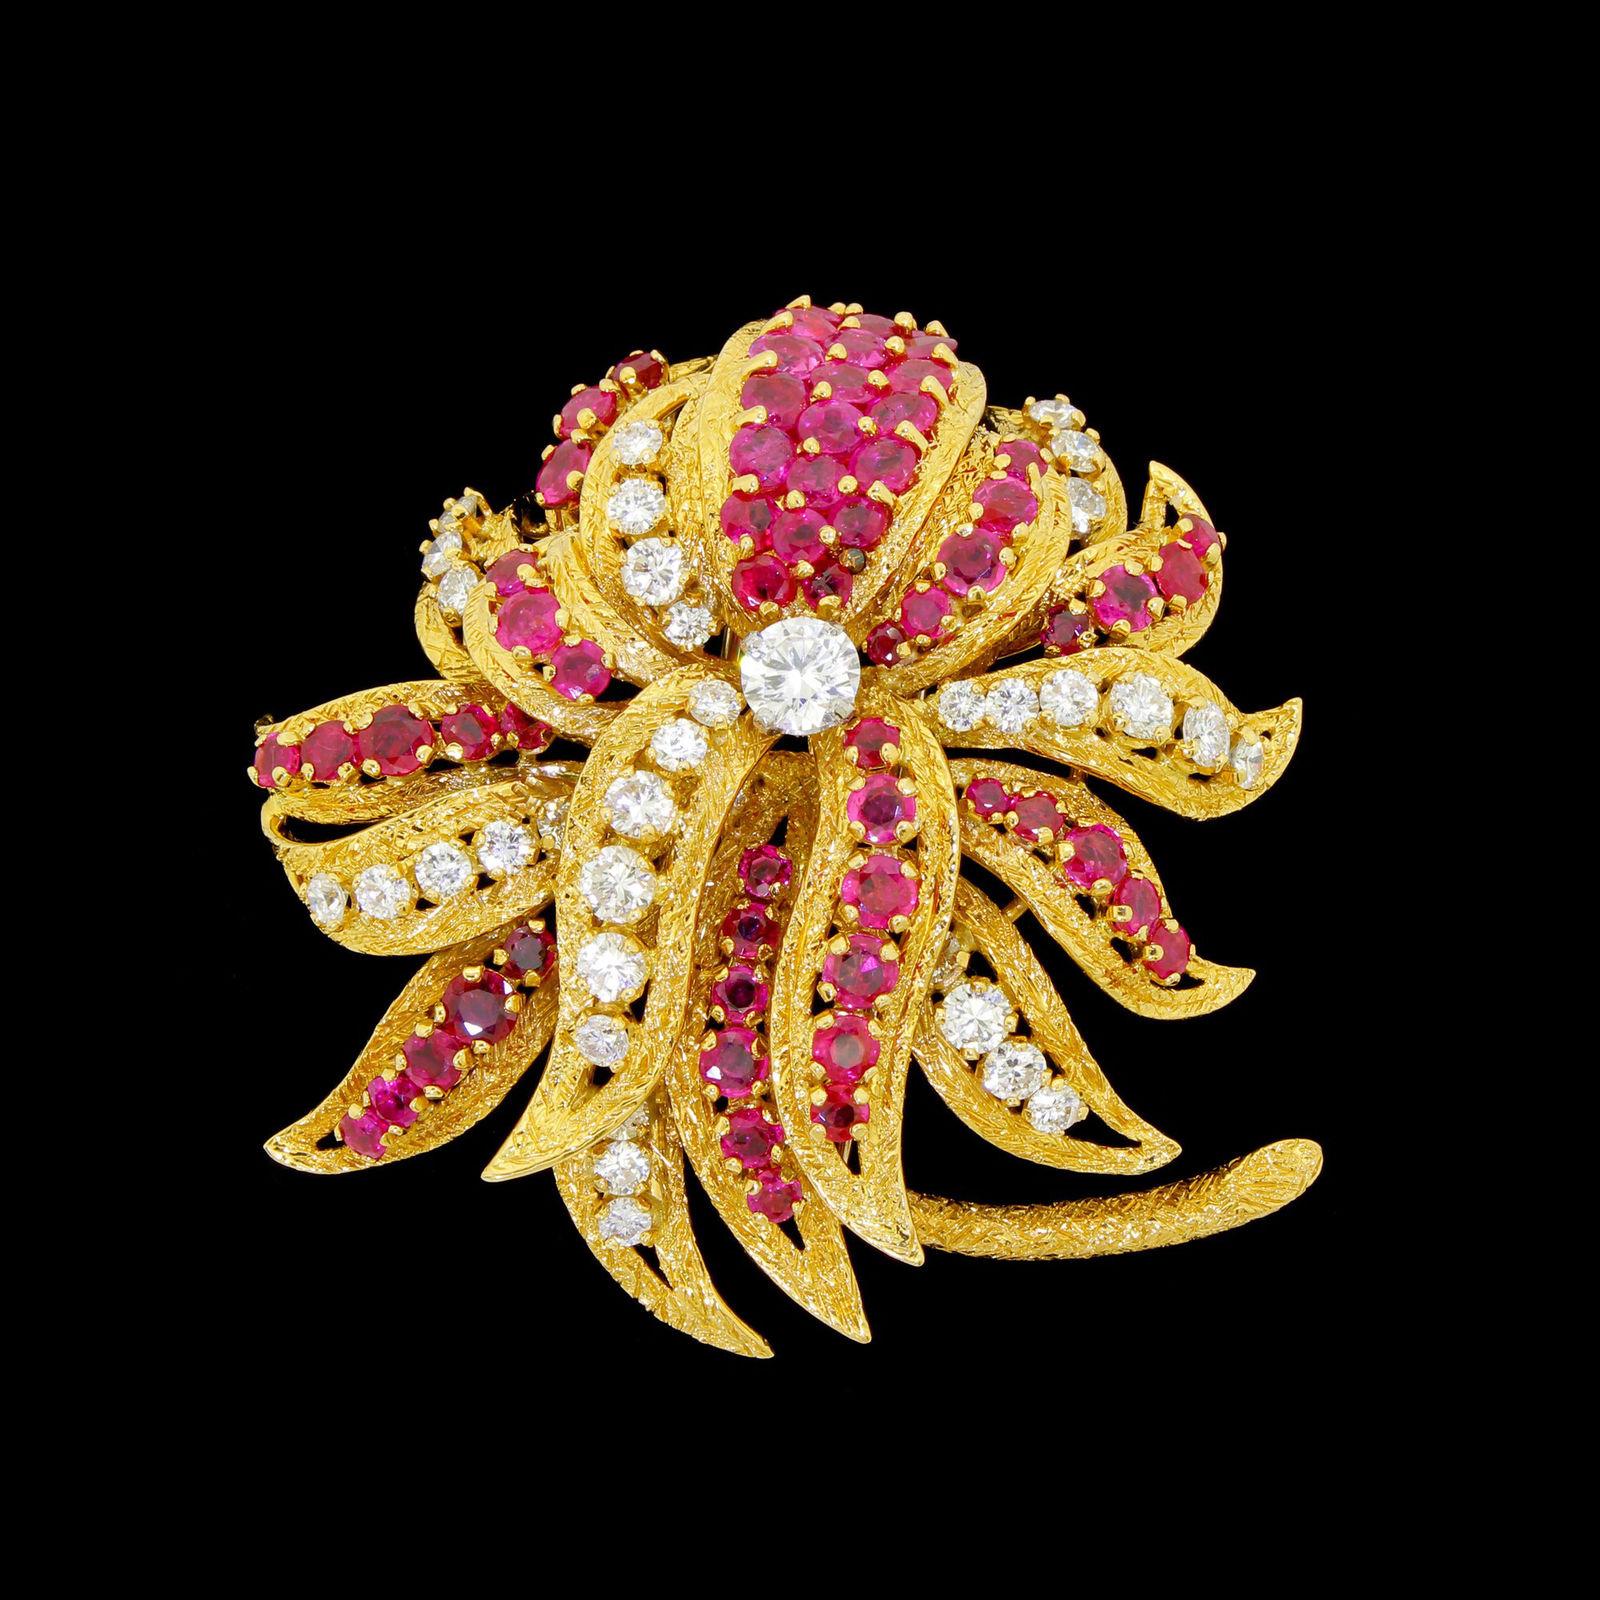 Impressive Kutchinsky Of London floral spray brooch that is made out of thick 18 Karat gold and has an abundance of high quality Diamond and Ruby gemstones.
This magnificent piece has a 3D layered construction, each petal has been individally cast